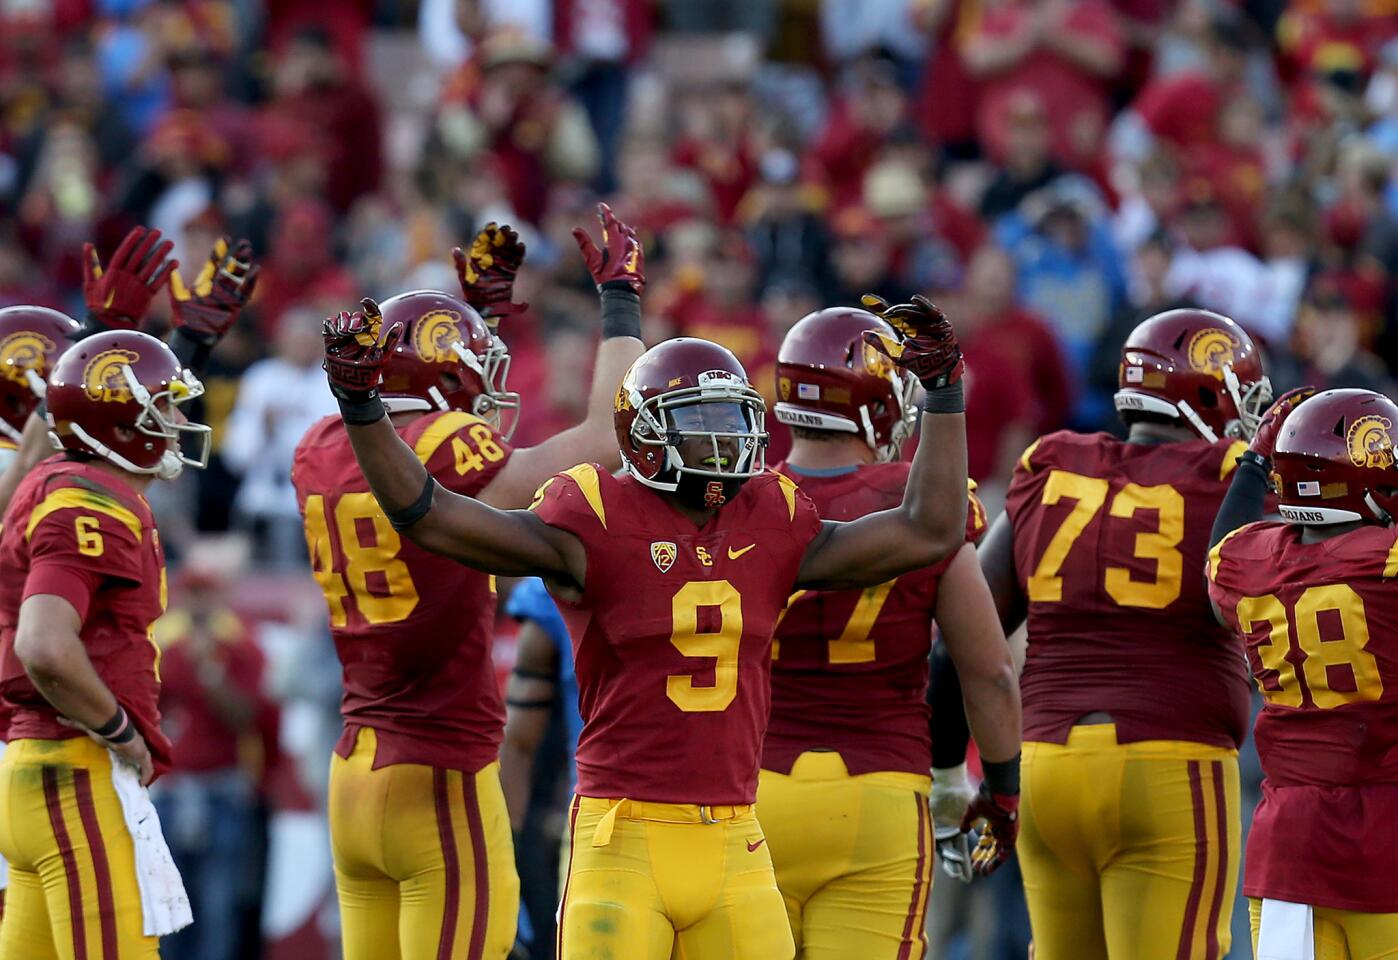 USC turns on the power to beat UCLA, 40-21, and advance to Pac-12 title game